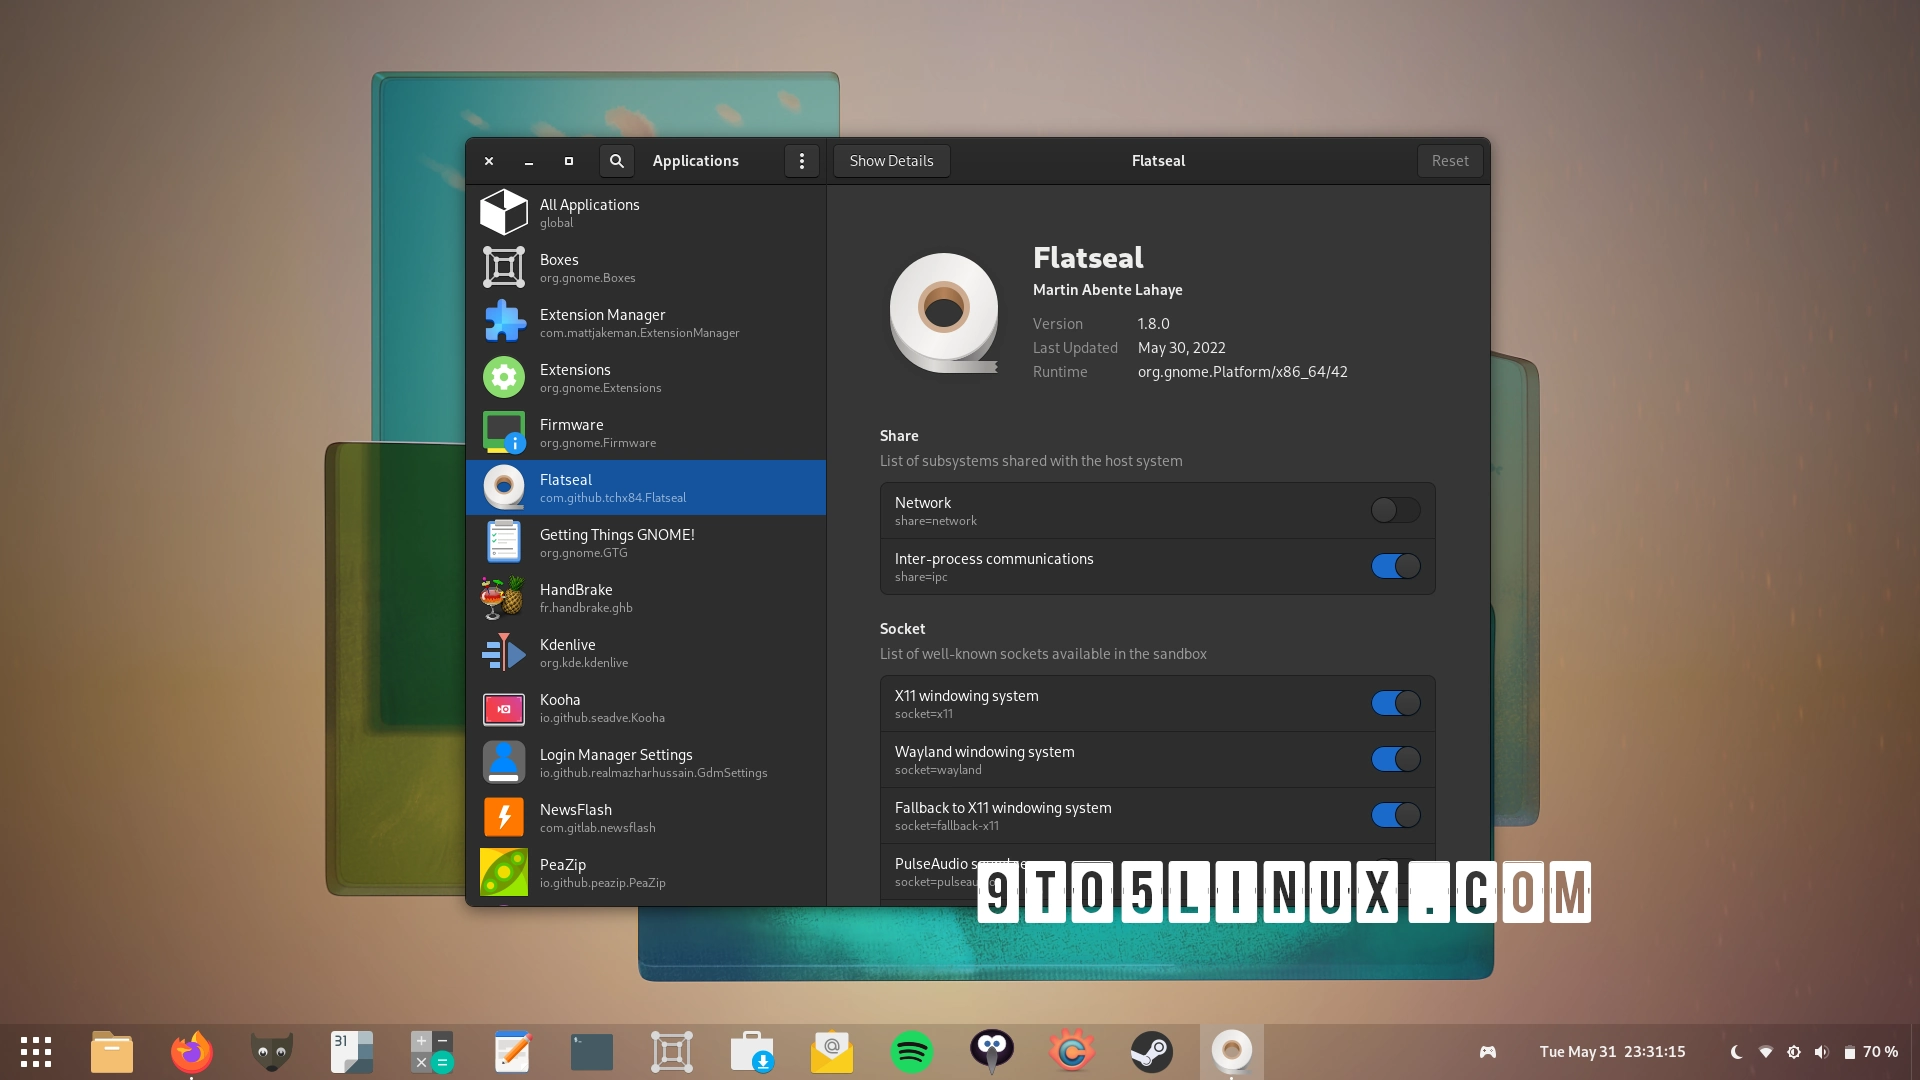 Flatpak Permissions Manager App Flatseal 1.8 Adds More Useful Options and Improvements